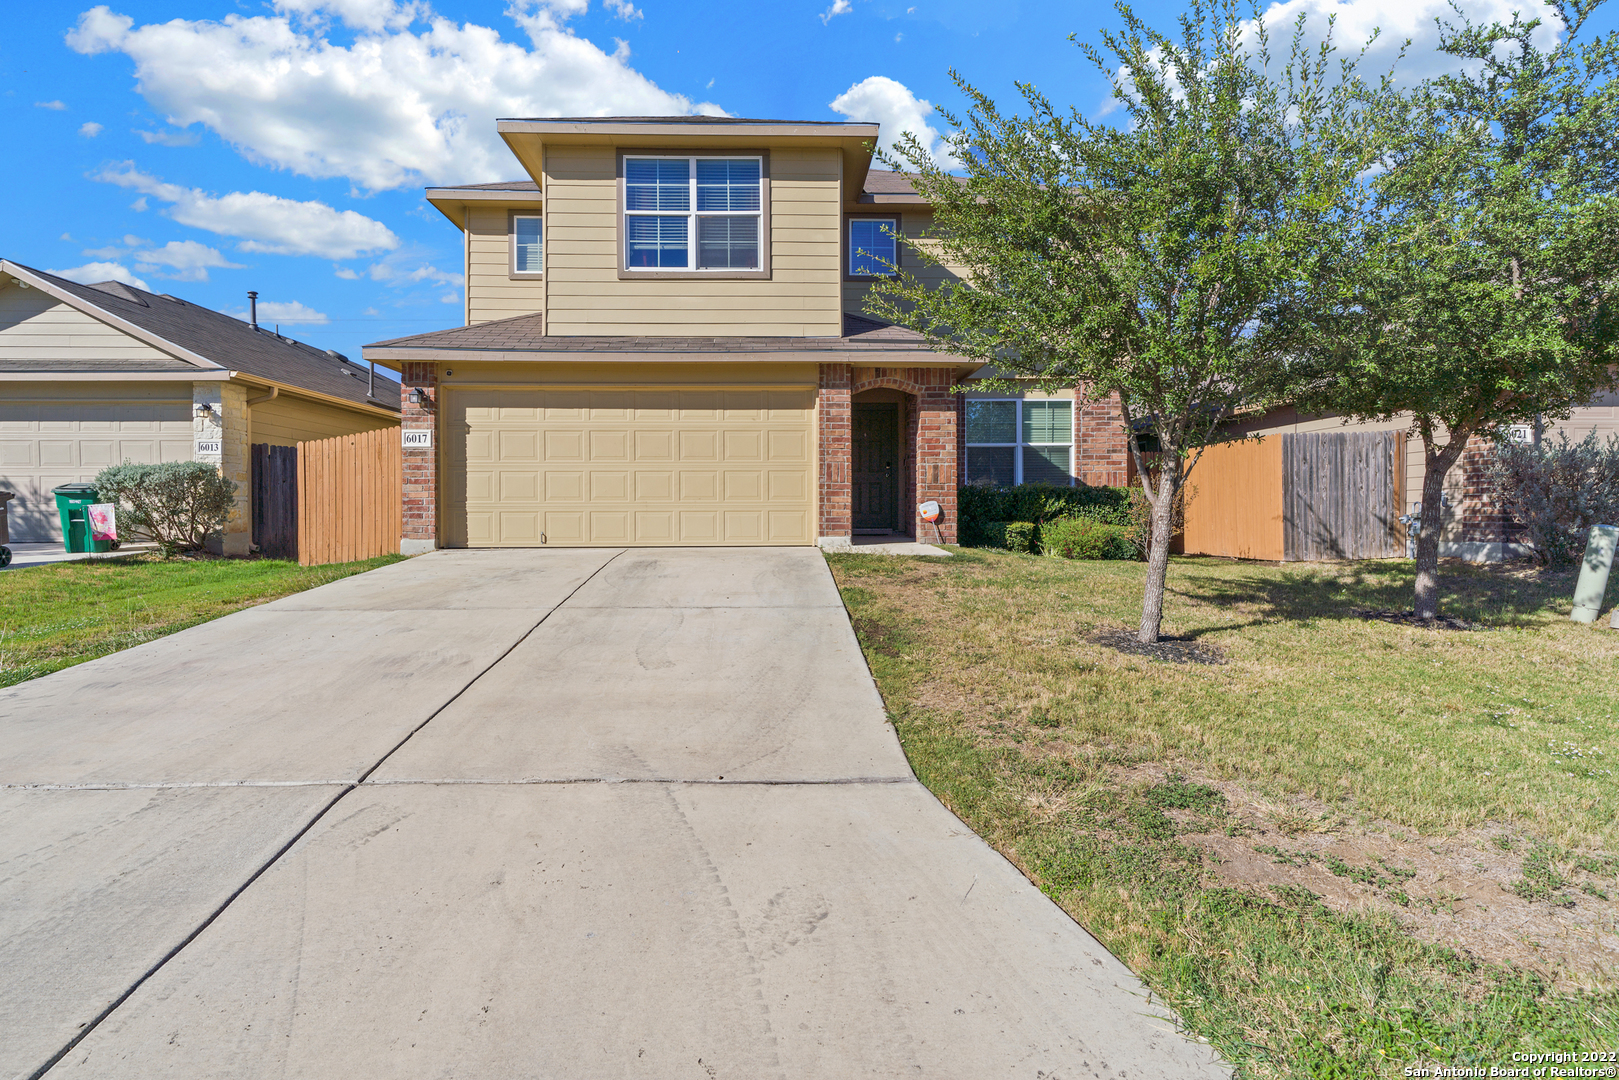 This well maintained gem located just minutes from I-10, Fort Sam Houston, Randolph AFB and Lackland AFB is a must see. This spacious 5 bedroom 2.5 bath home has lots to offer; from granite countertops, tile floors, large bedrooms, separate dining, gas cooking, sprinkler system and much more... Book your appointment today!